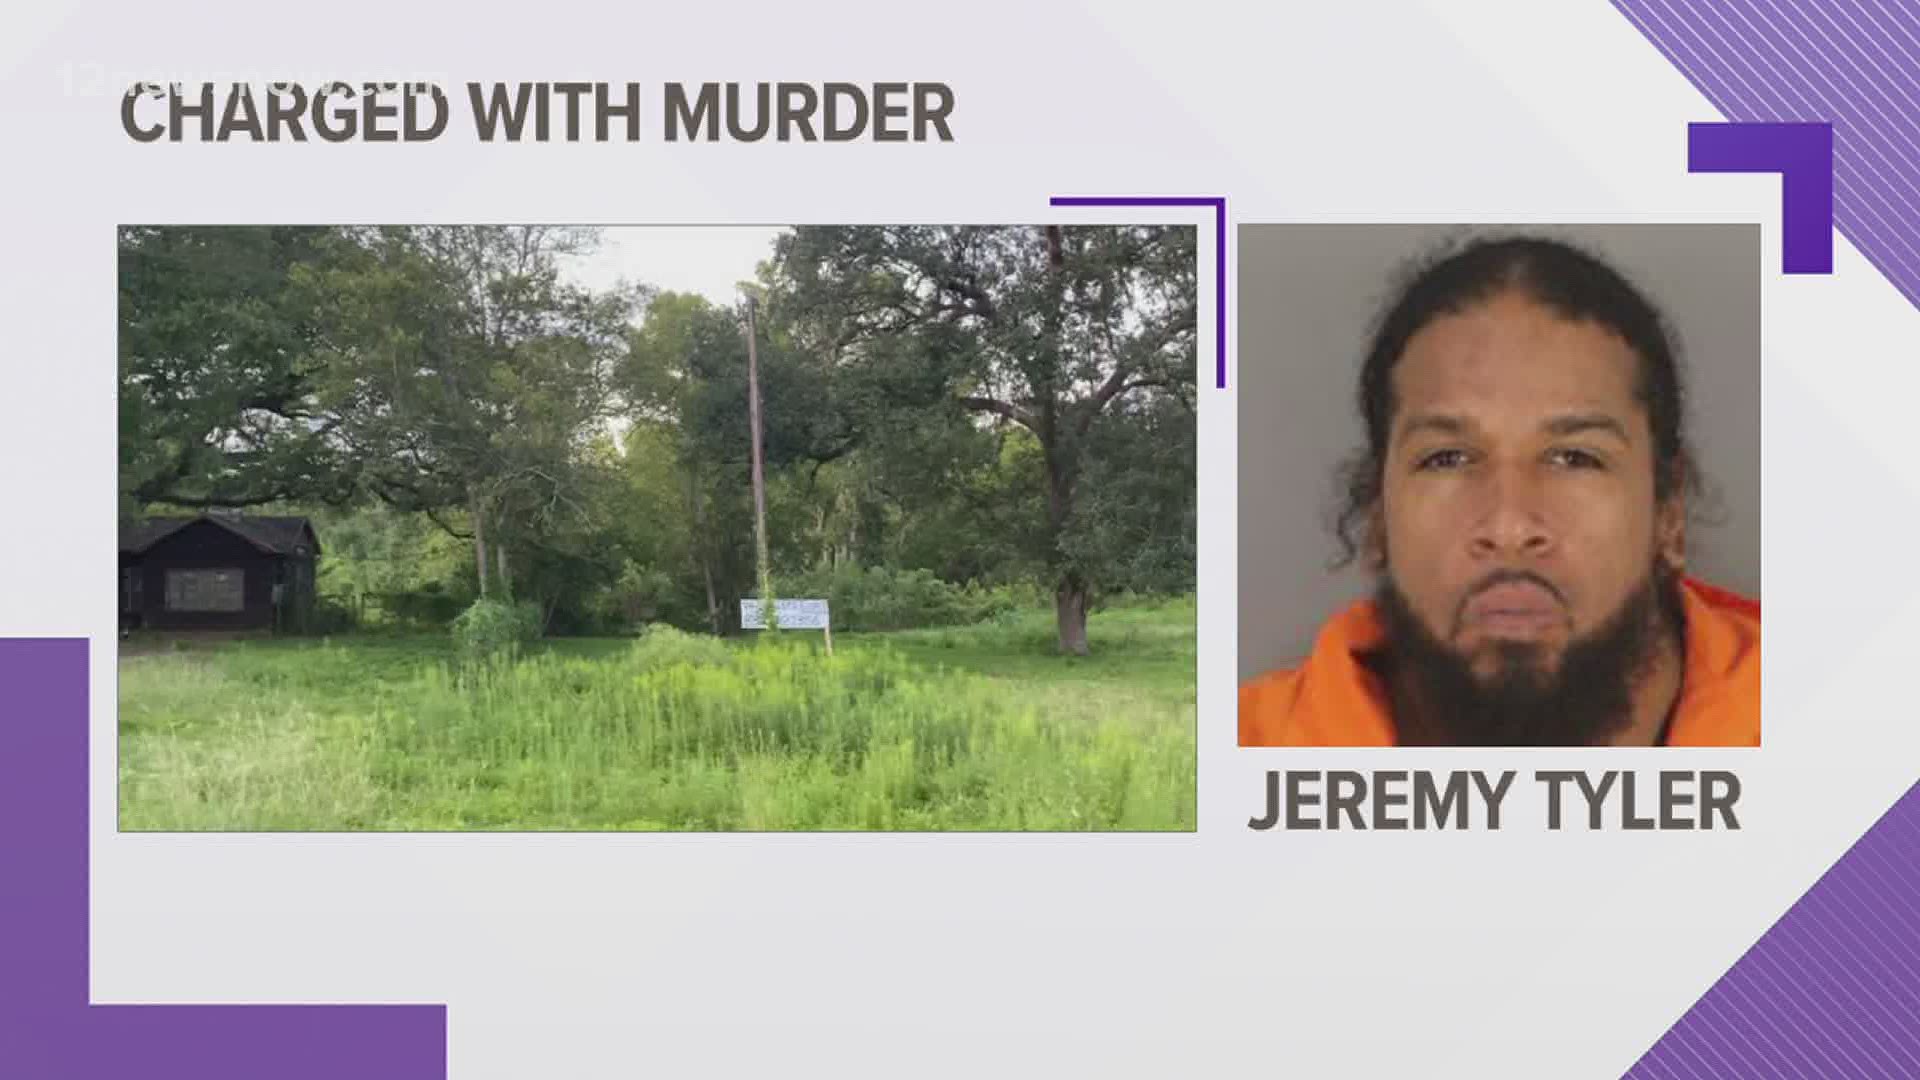 Jeremy Tyler is behind bars and his bond is set at $1 million